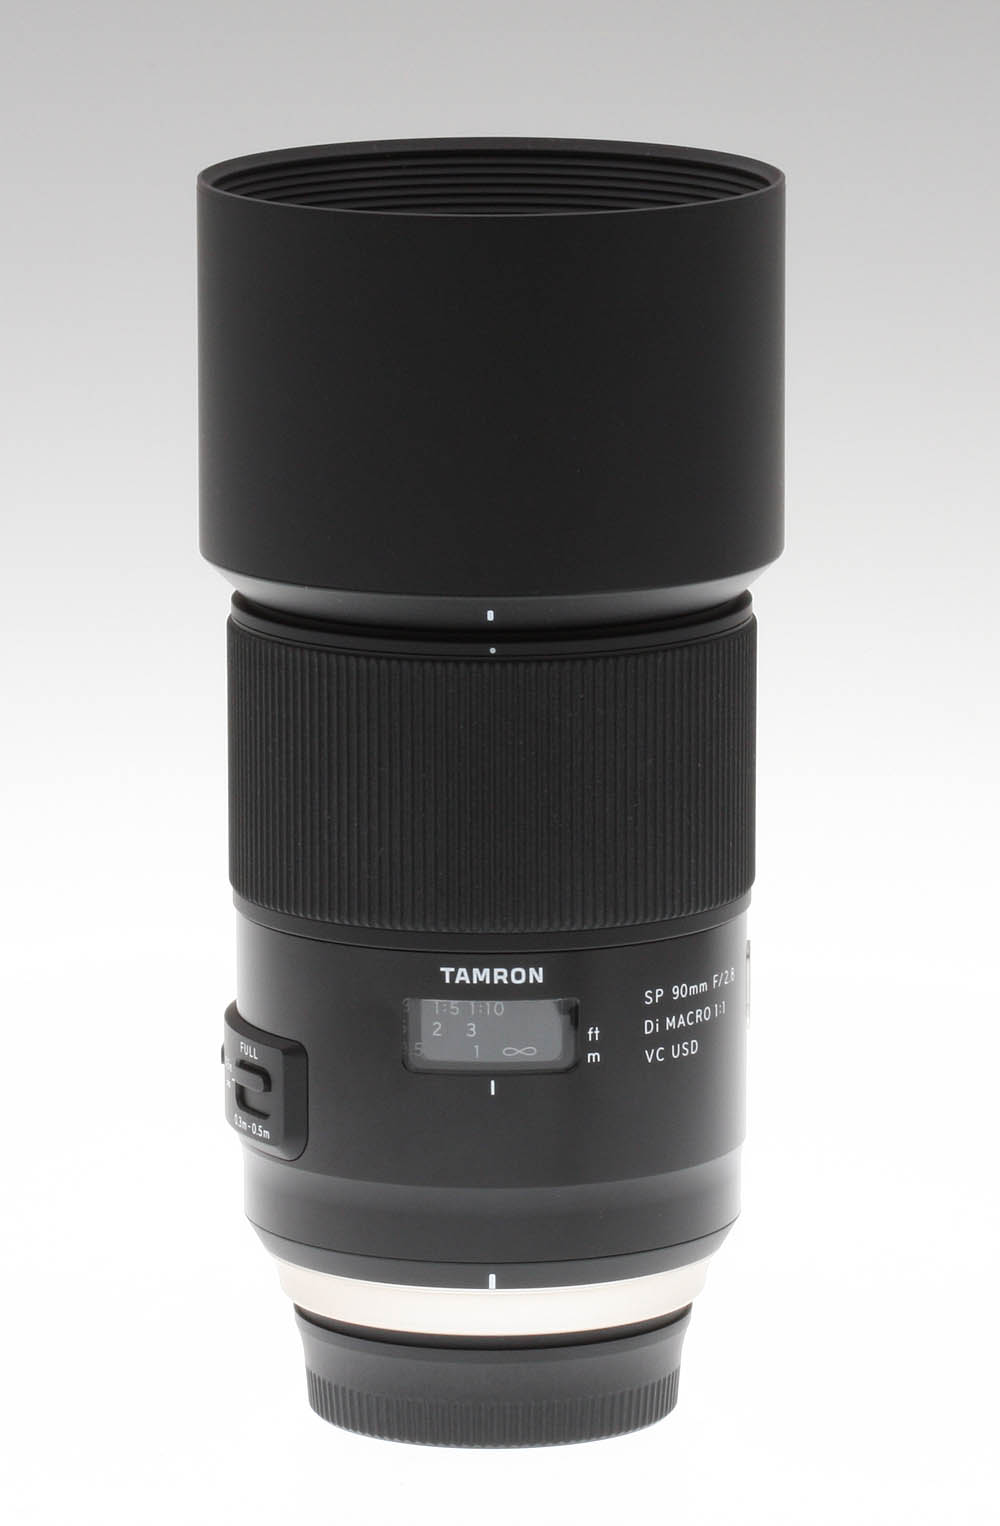 for SP 90mm F/2.8 Di MACRO 1:1 VC USD Tamron Official TAMRON Lens Hood HF017 TRACKING 